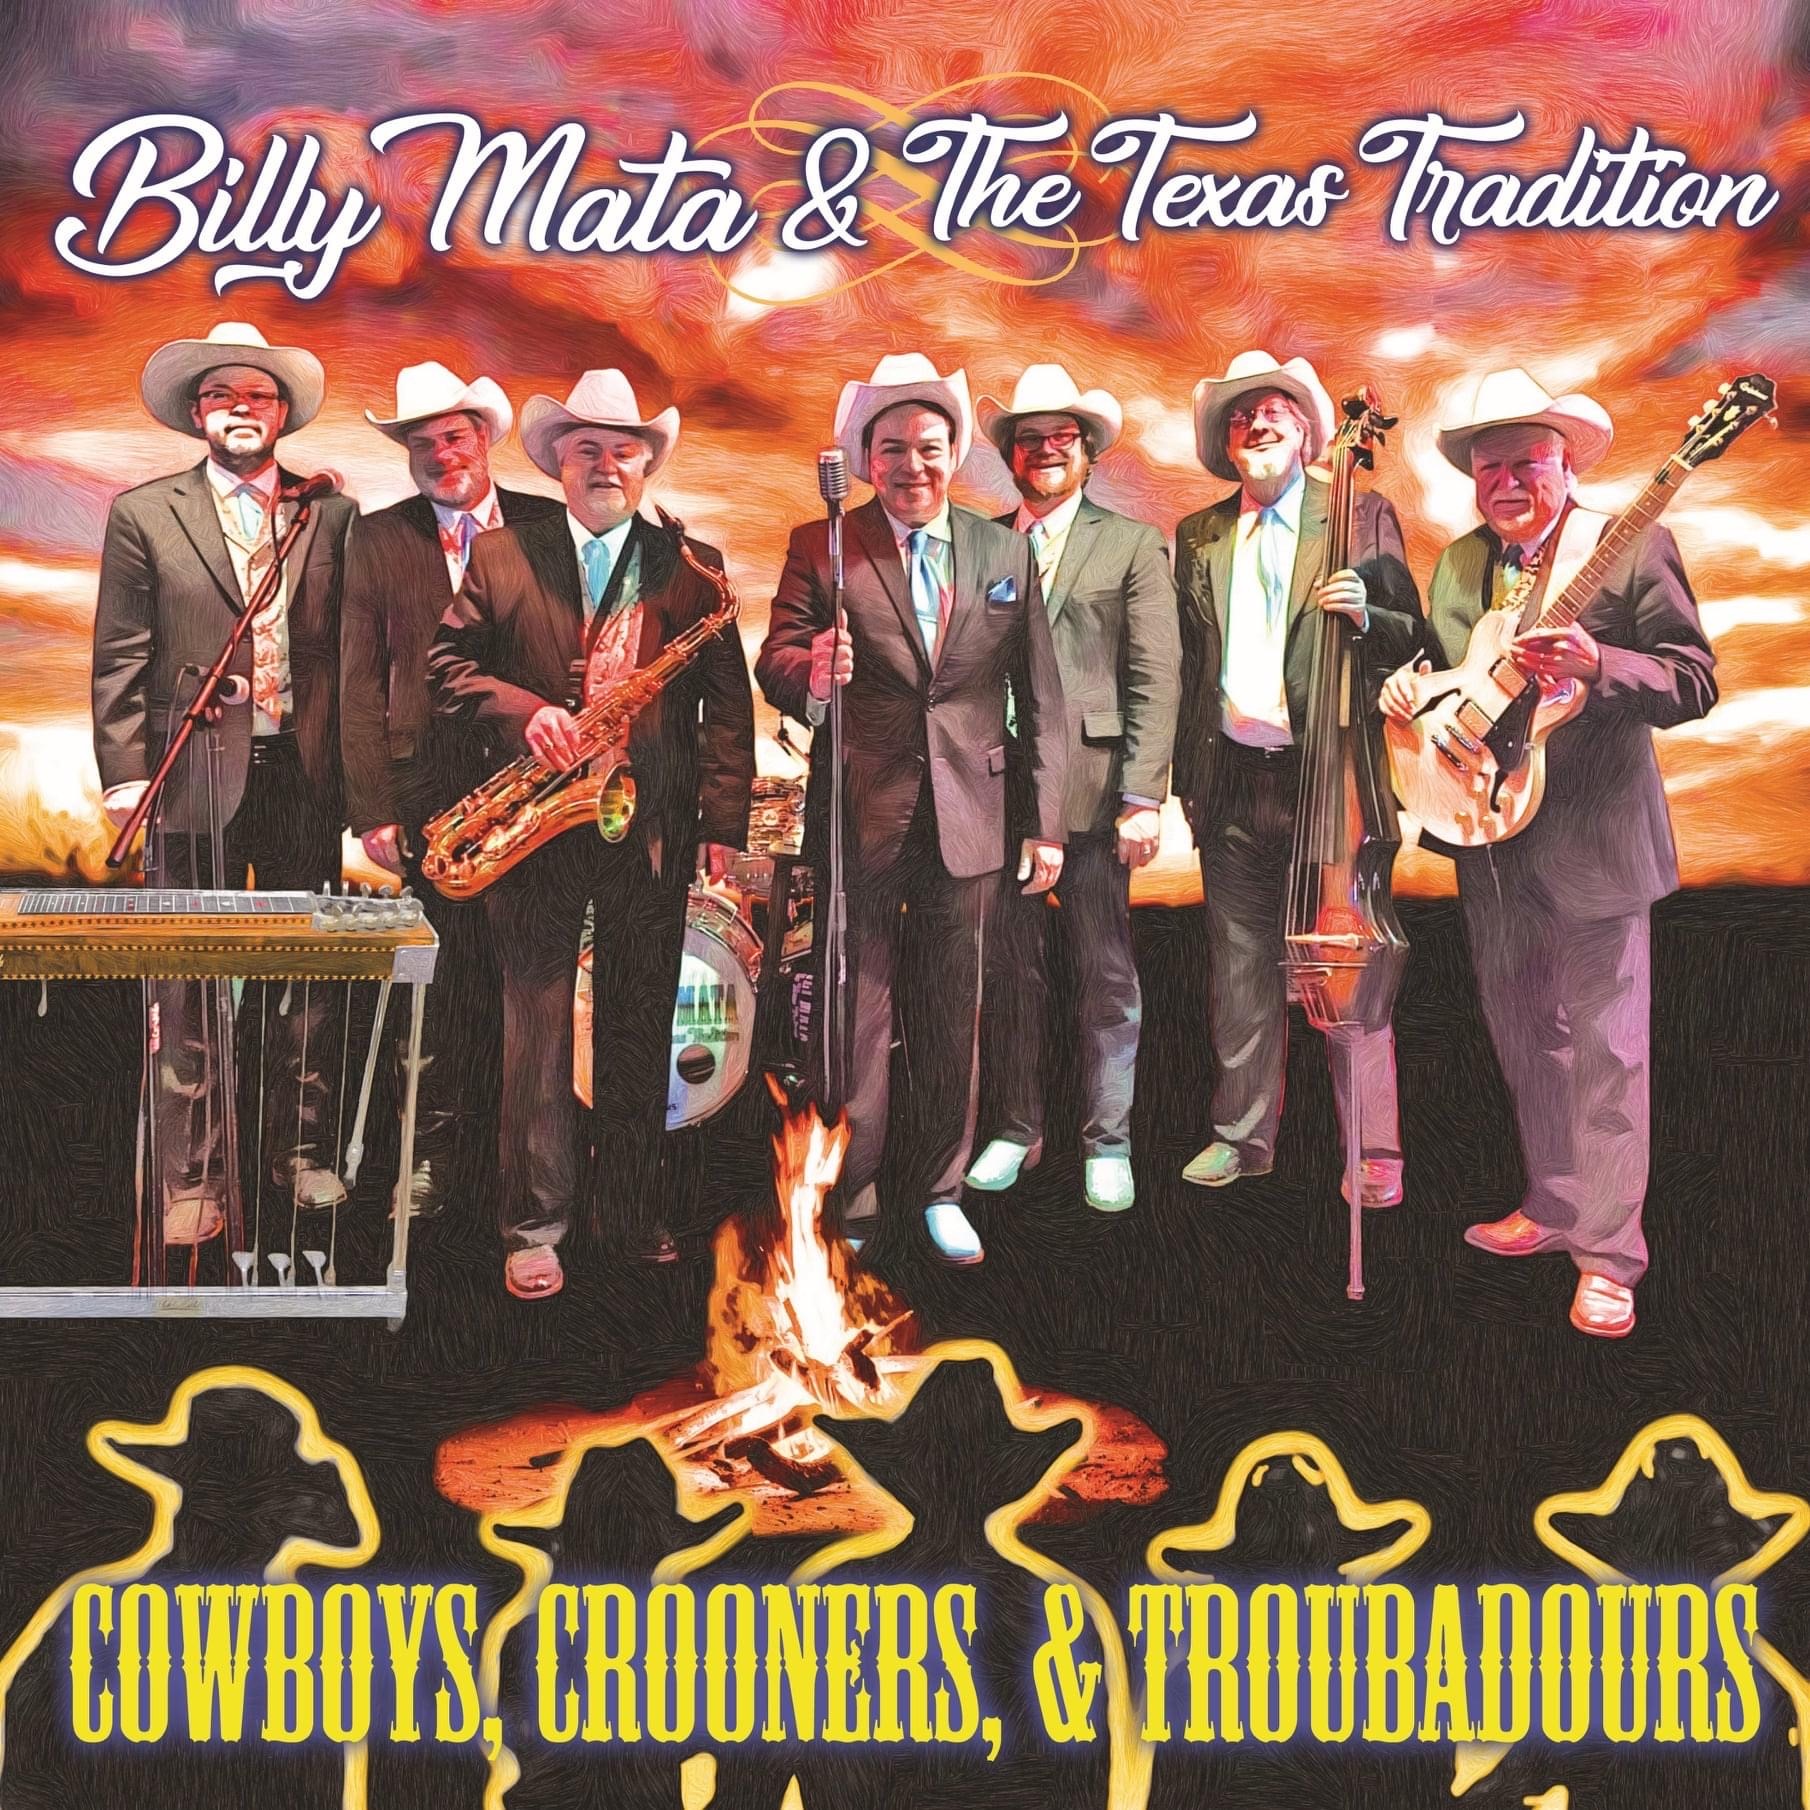 Art for Ain't That a Kick in The Head by BILLY MATA & THE TEXAS TRADITION